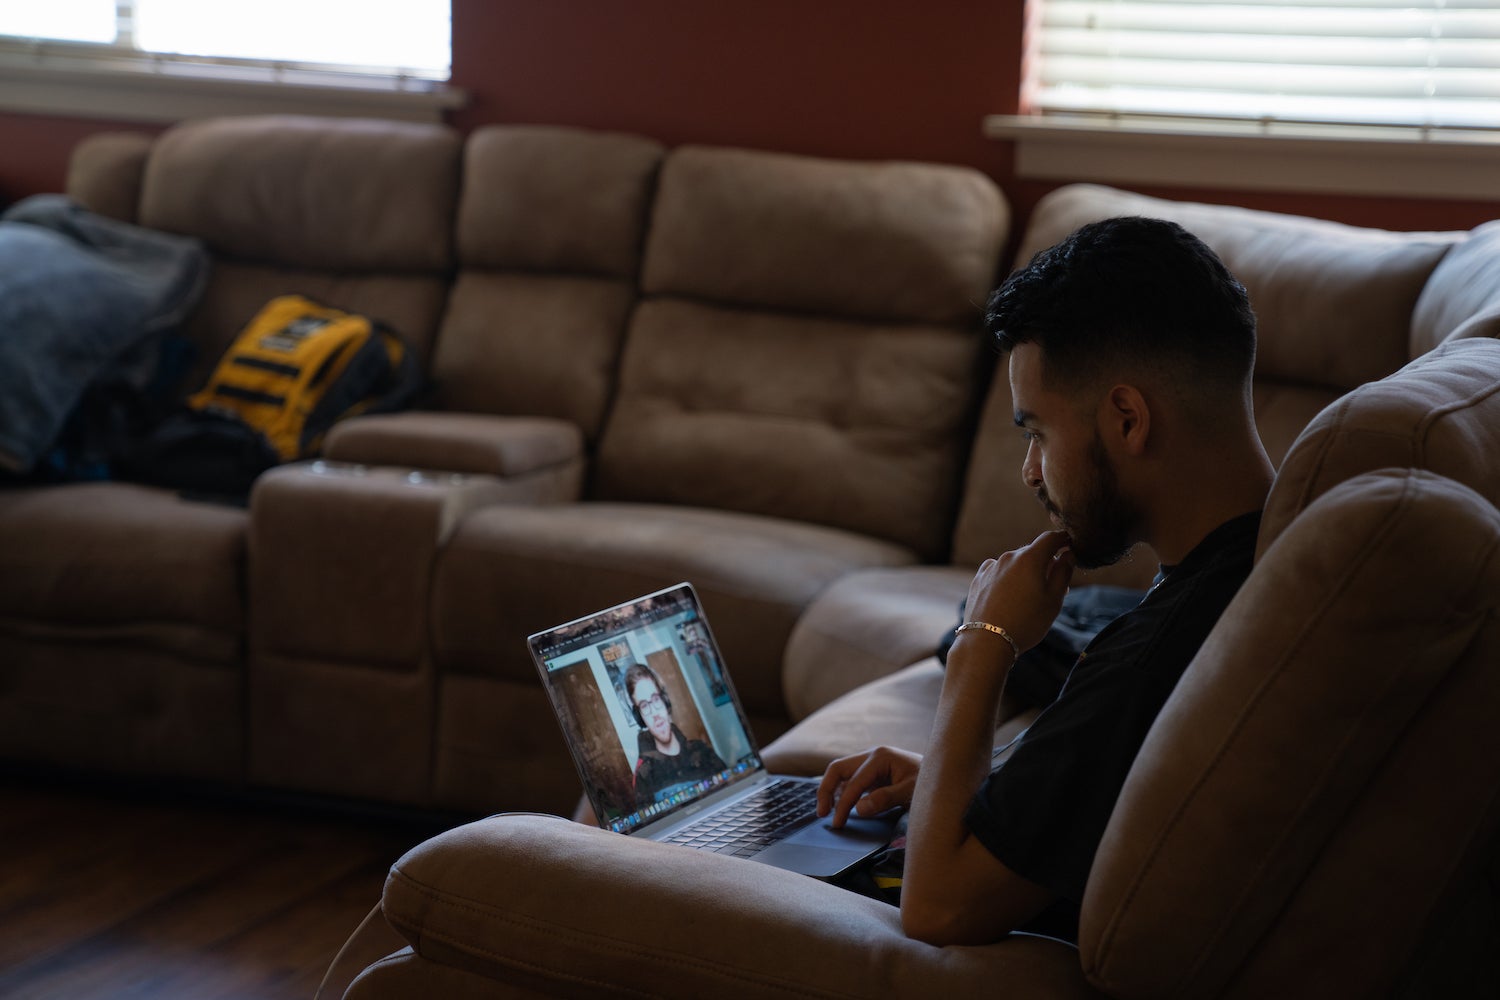 A person sitting on a couch looks at a computer screen, on which there is a Zoom call occurring.